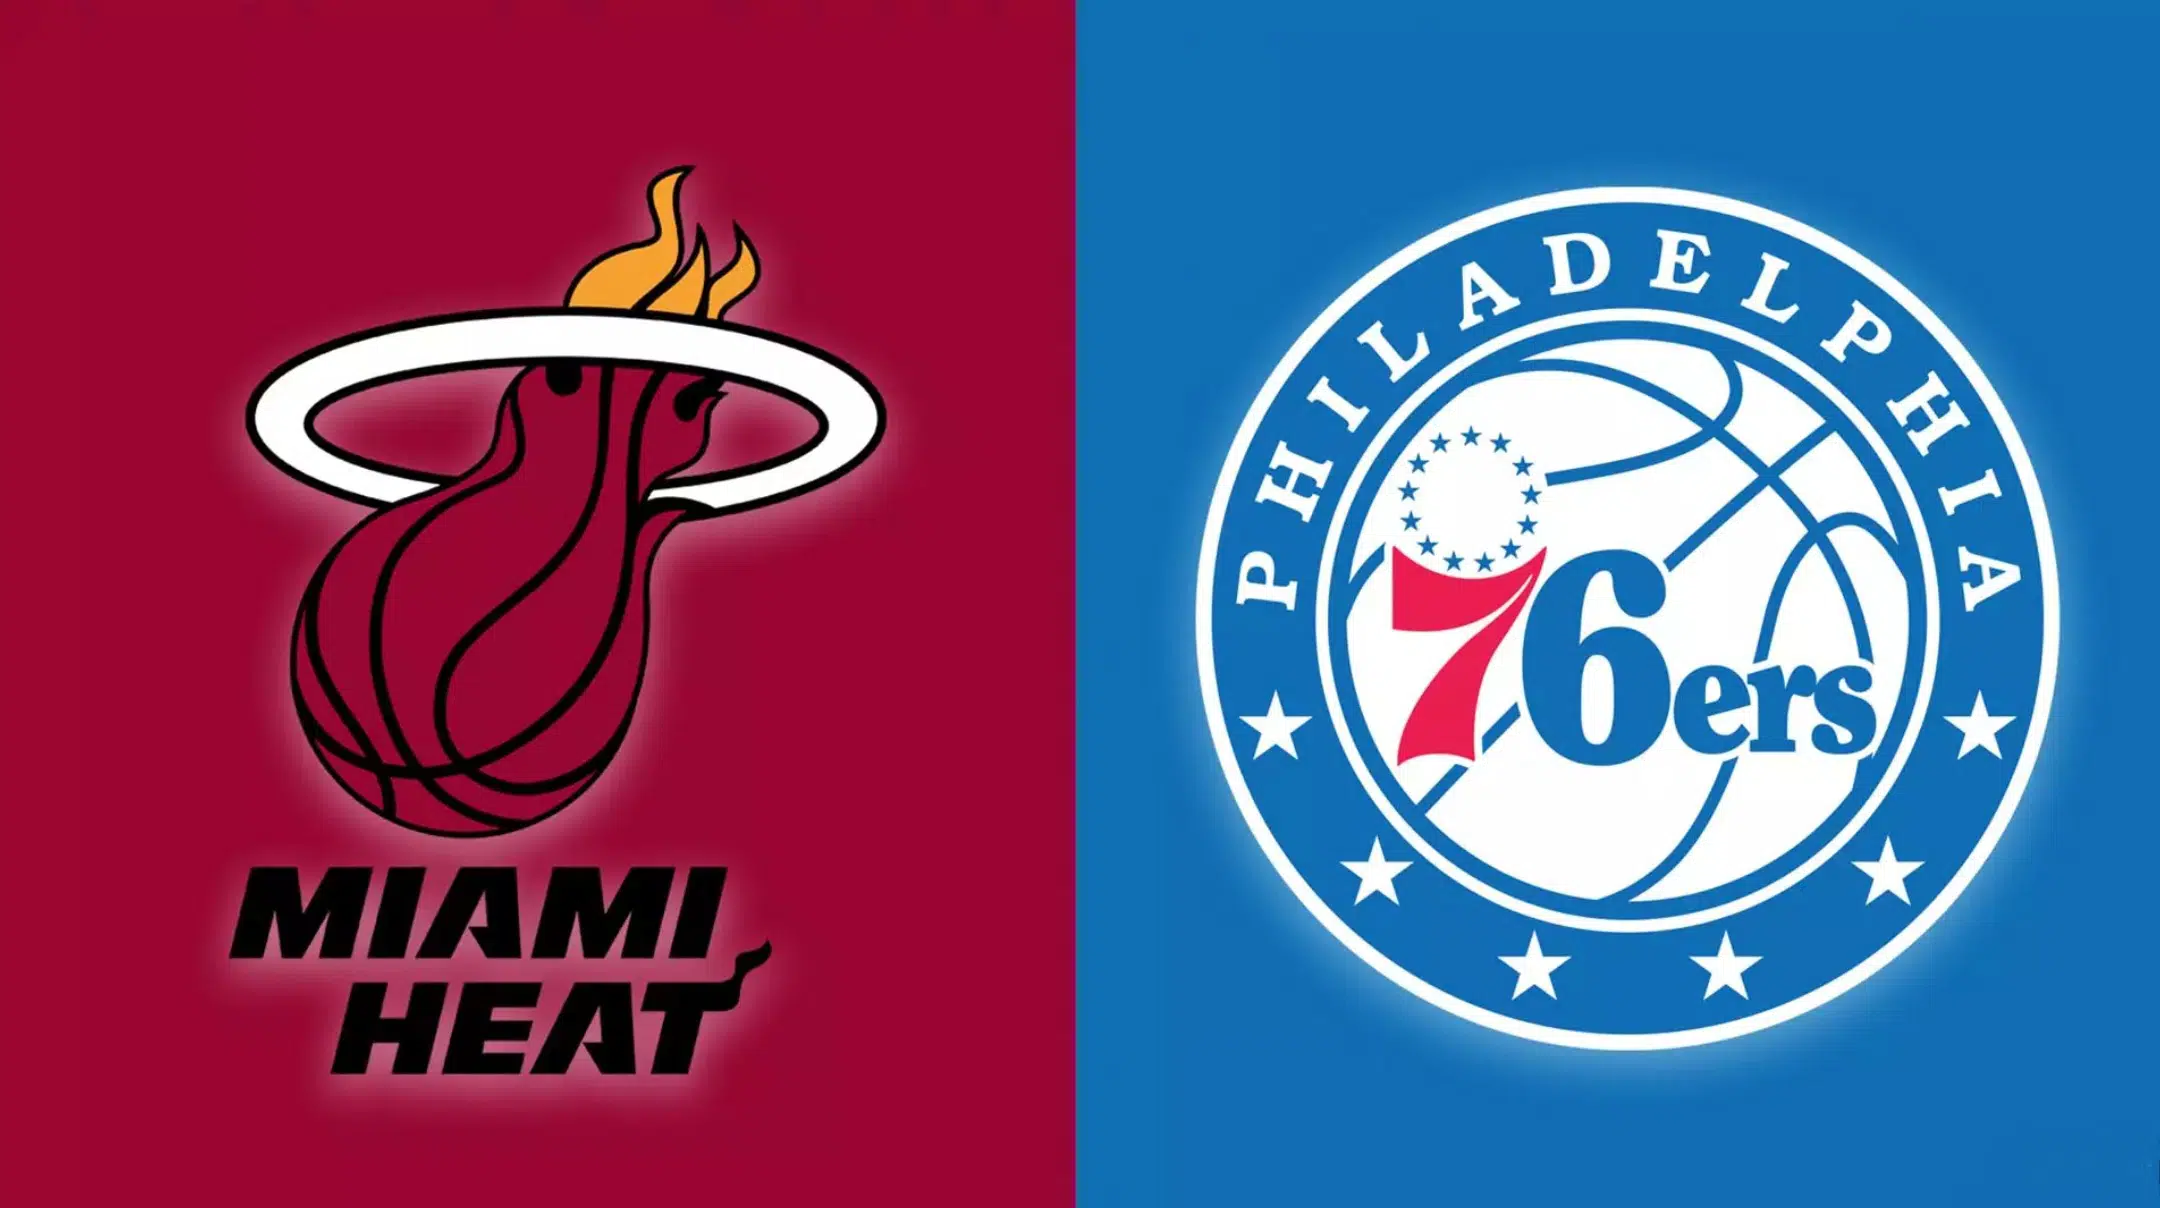 NBA Betting Odds & Picks: Our Staff's Best Bets for 76ers vs